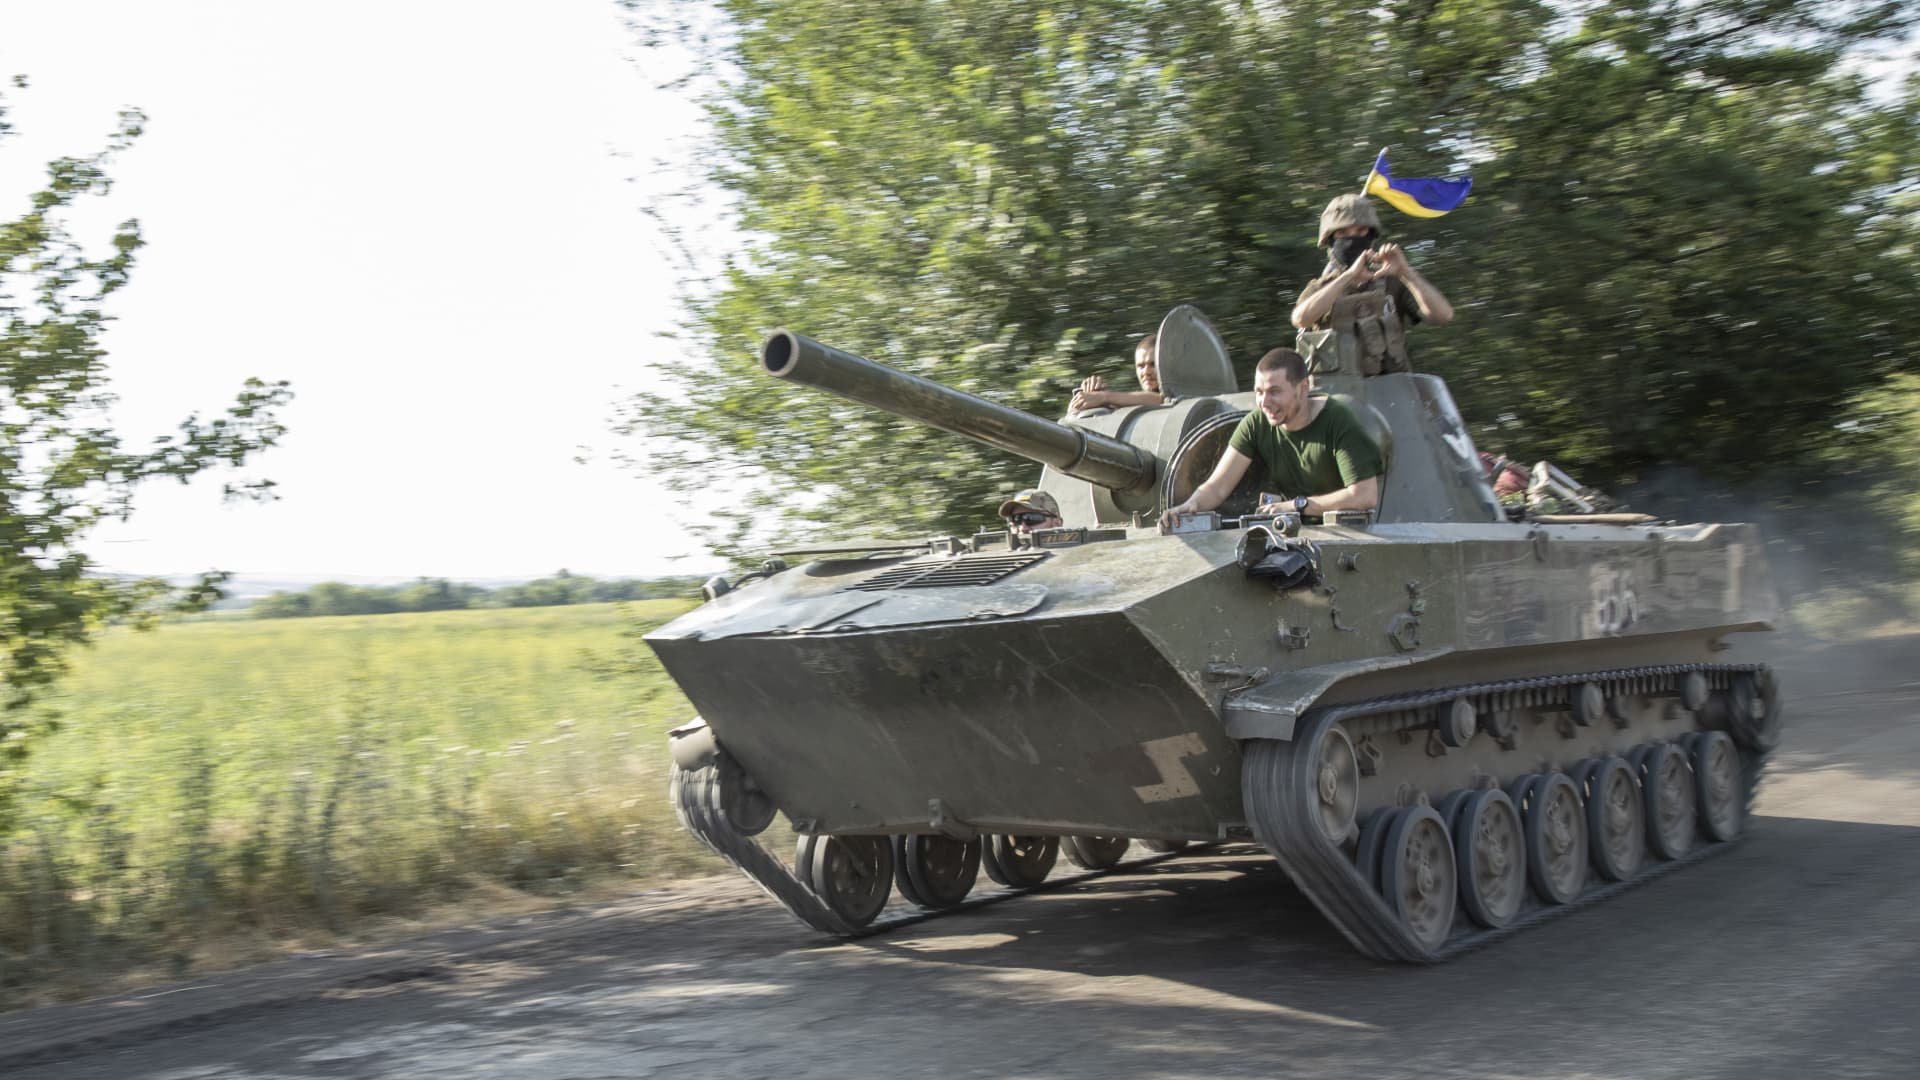 Ukrainian serviceman ride on top of a tank towards the battlefield on the Siversk frontline to the east of Sloviansk, Ukraine, July 4th, 2022.